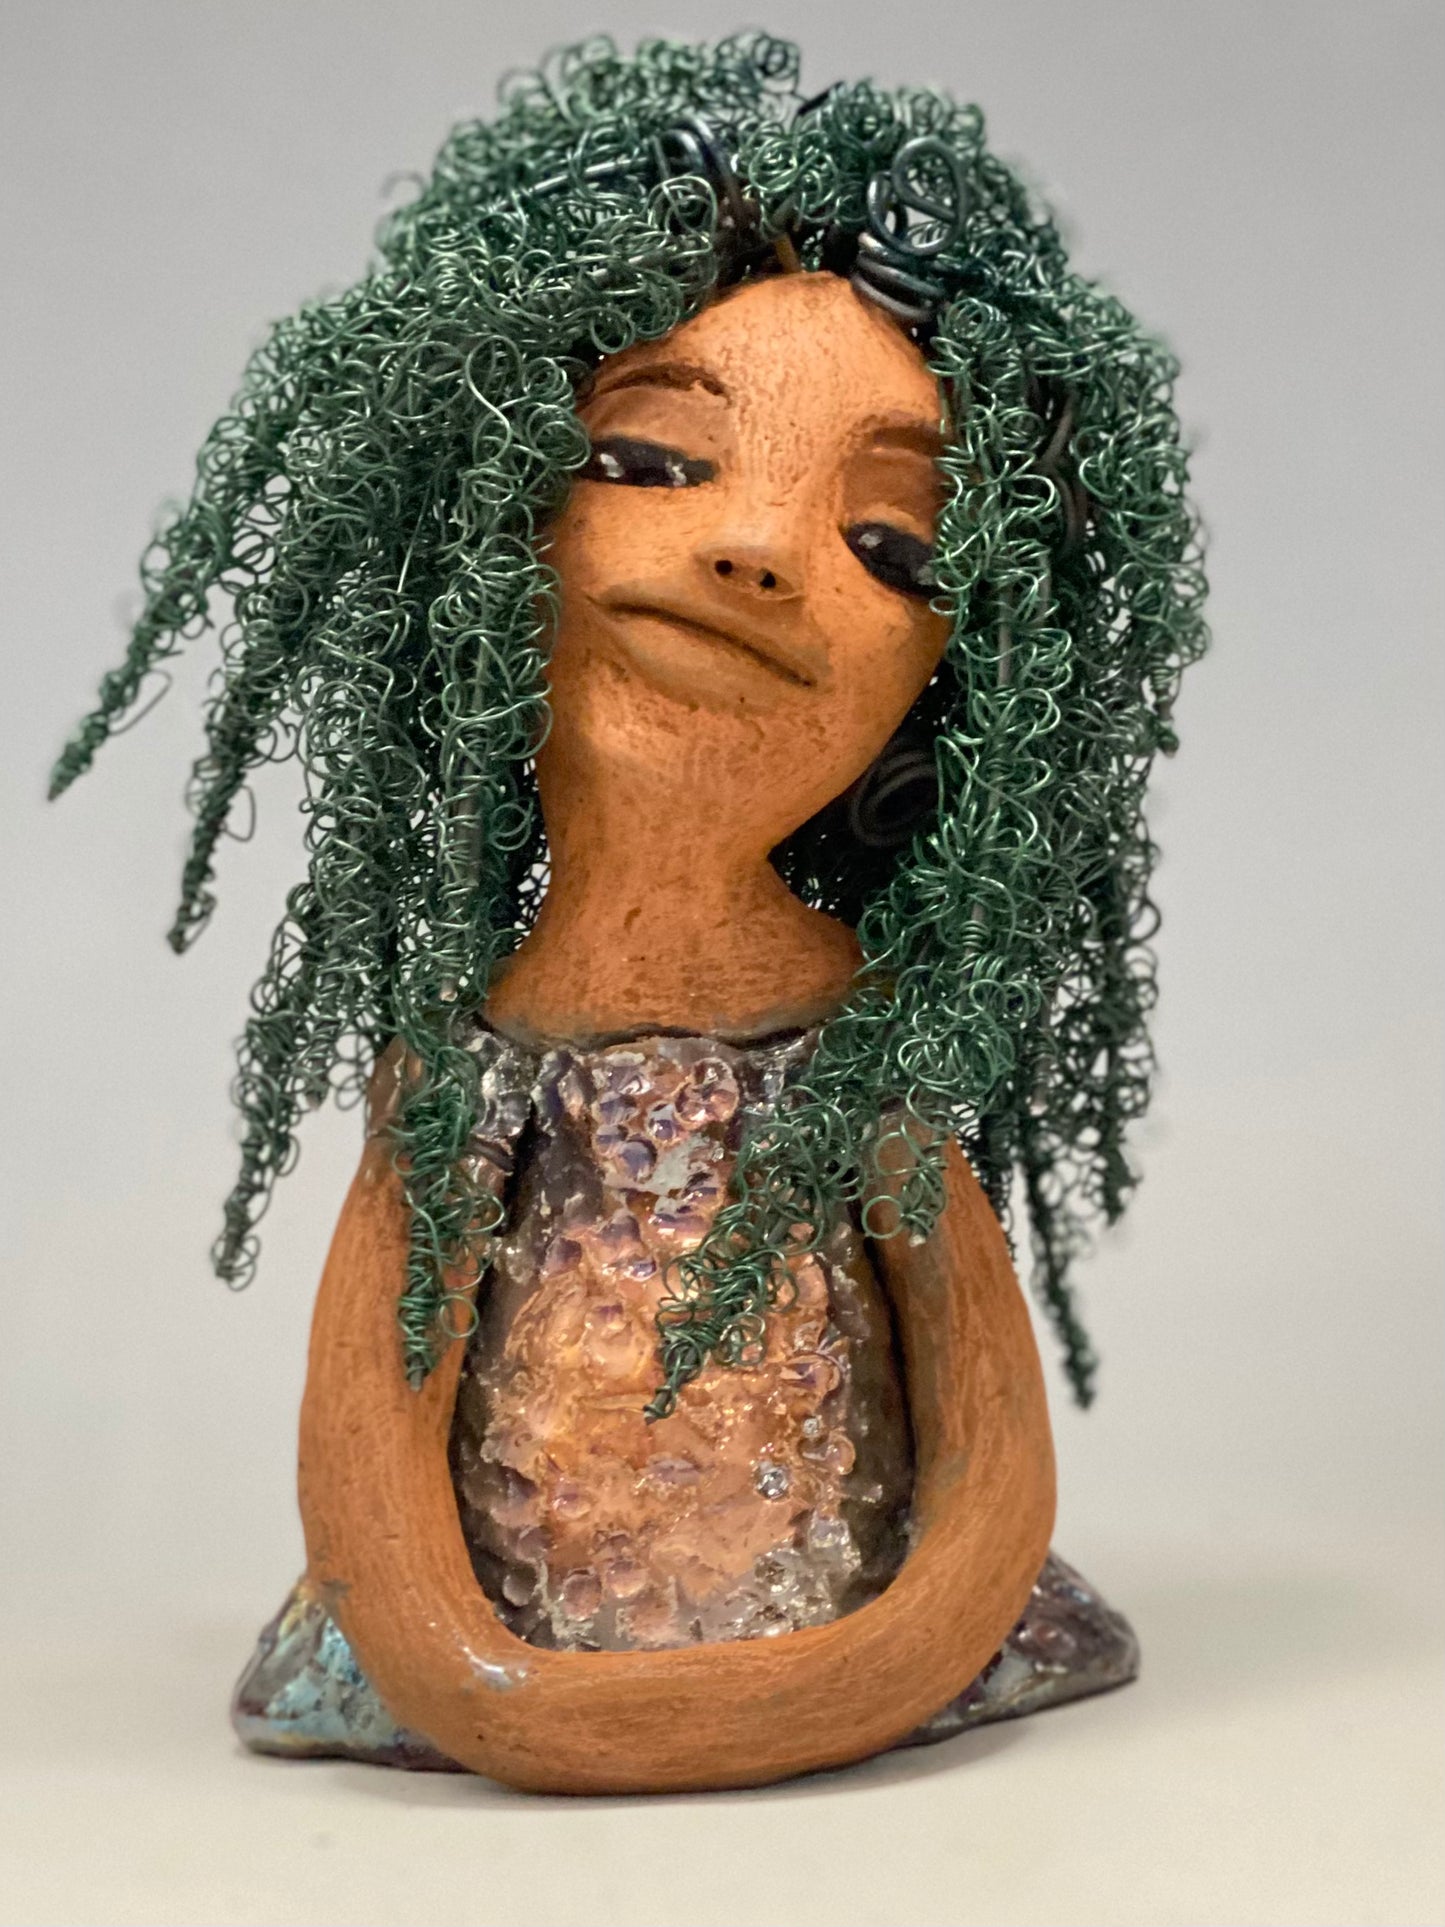 Nia Nia stands 8" x 5" x 5.5" and weighs 1.04 lbs. She has a lovely honey brown complexion with soft brown lips. She has long twisted wire locs hairstyle waist down!  Nia has a glossy metallic copper glazed dress. She has over 75 feet of 16 and 24 gauge emerald green wire for hair. It really took over 6 hours just to twist and do her hair! With  eyes wide opened, Alexis has hope of finding a new home.   